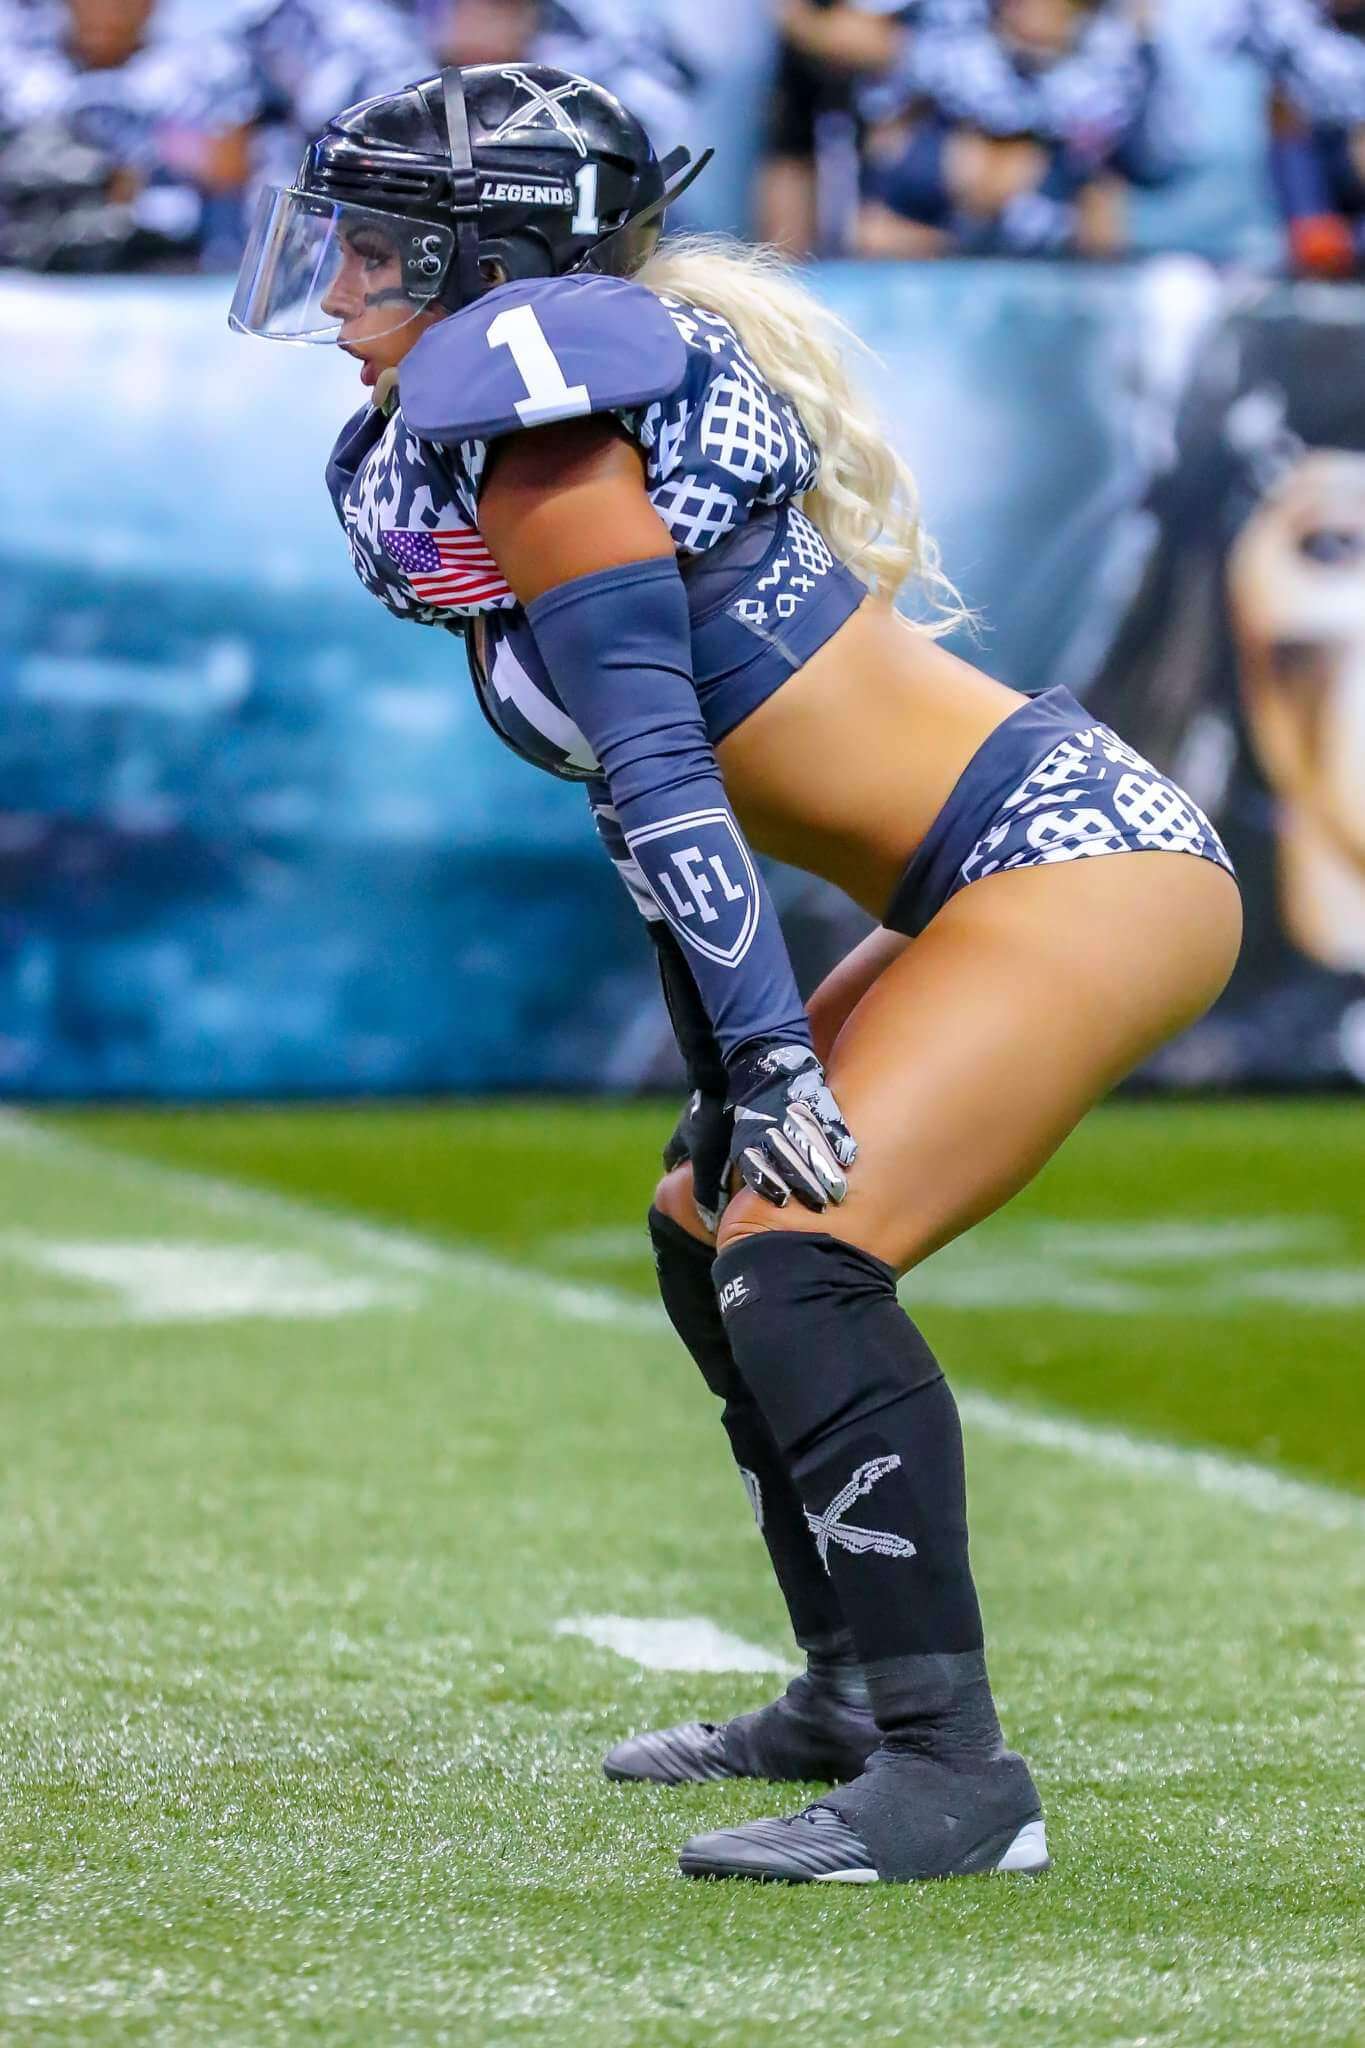 The Legends Football League Beautiful Women And Football, Need We Say Anymore! 170